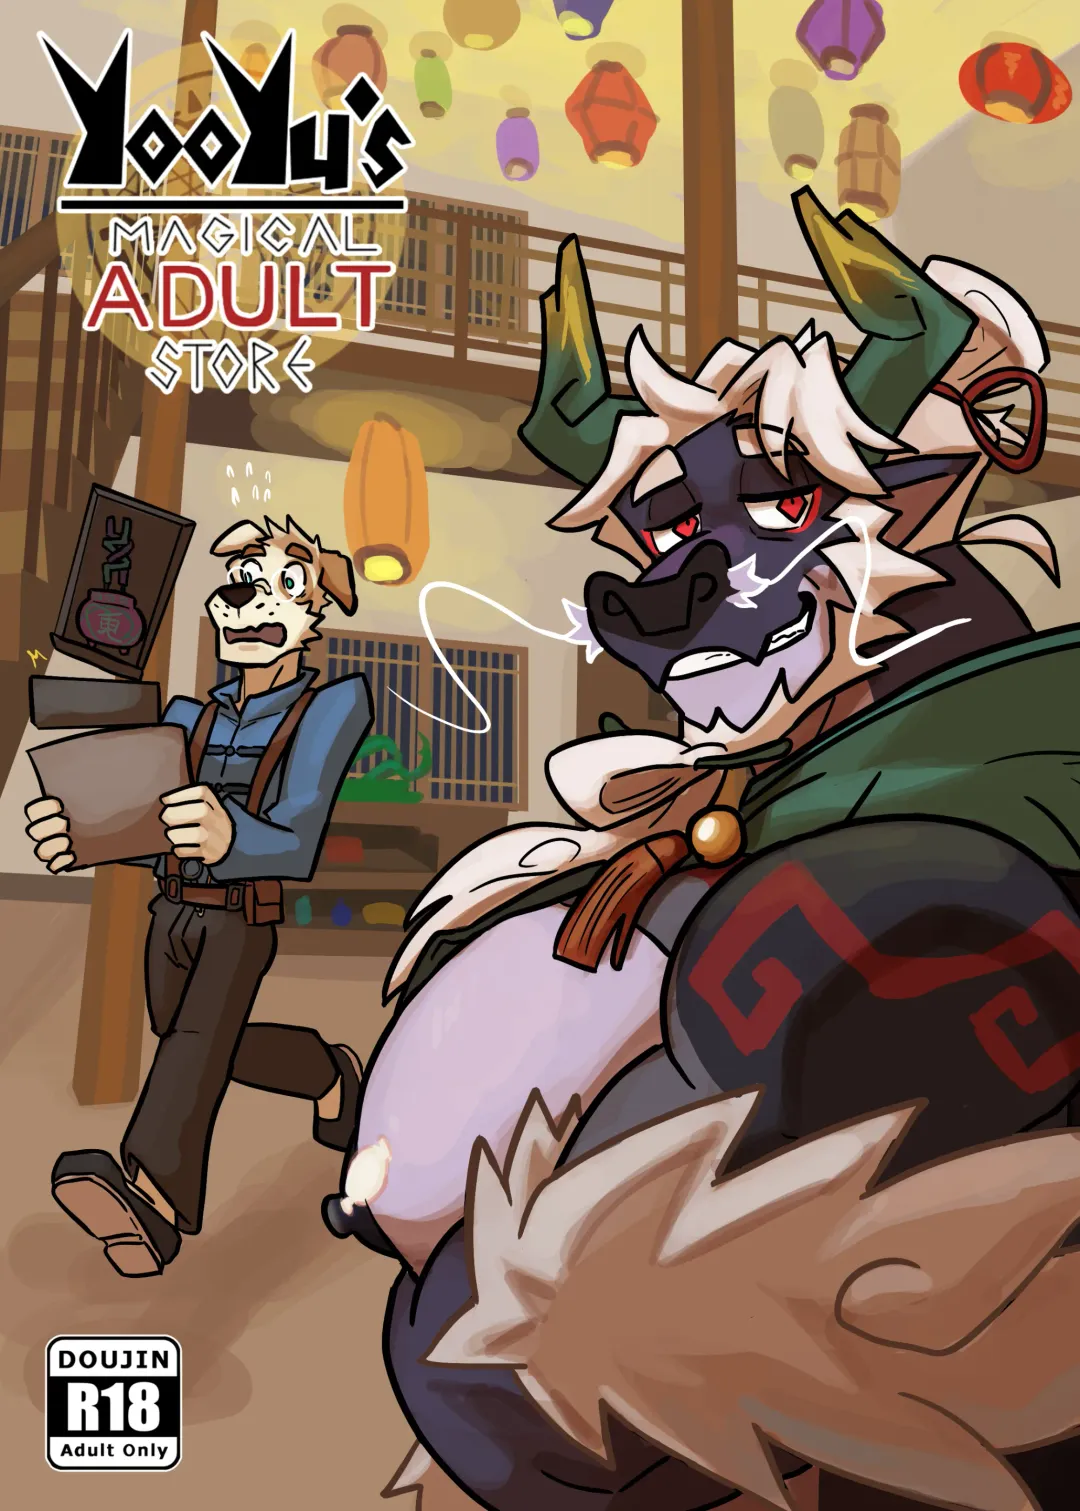 Read Yooyu's Magical Adult Store Chapter 4 - Fhentai.net